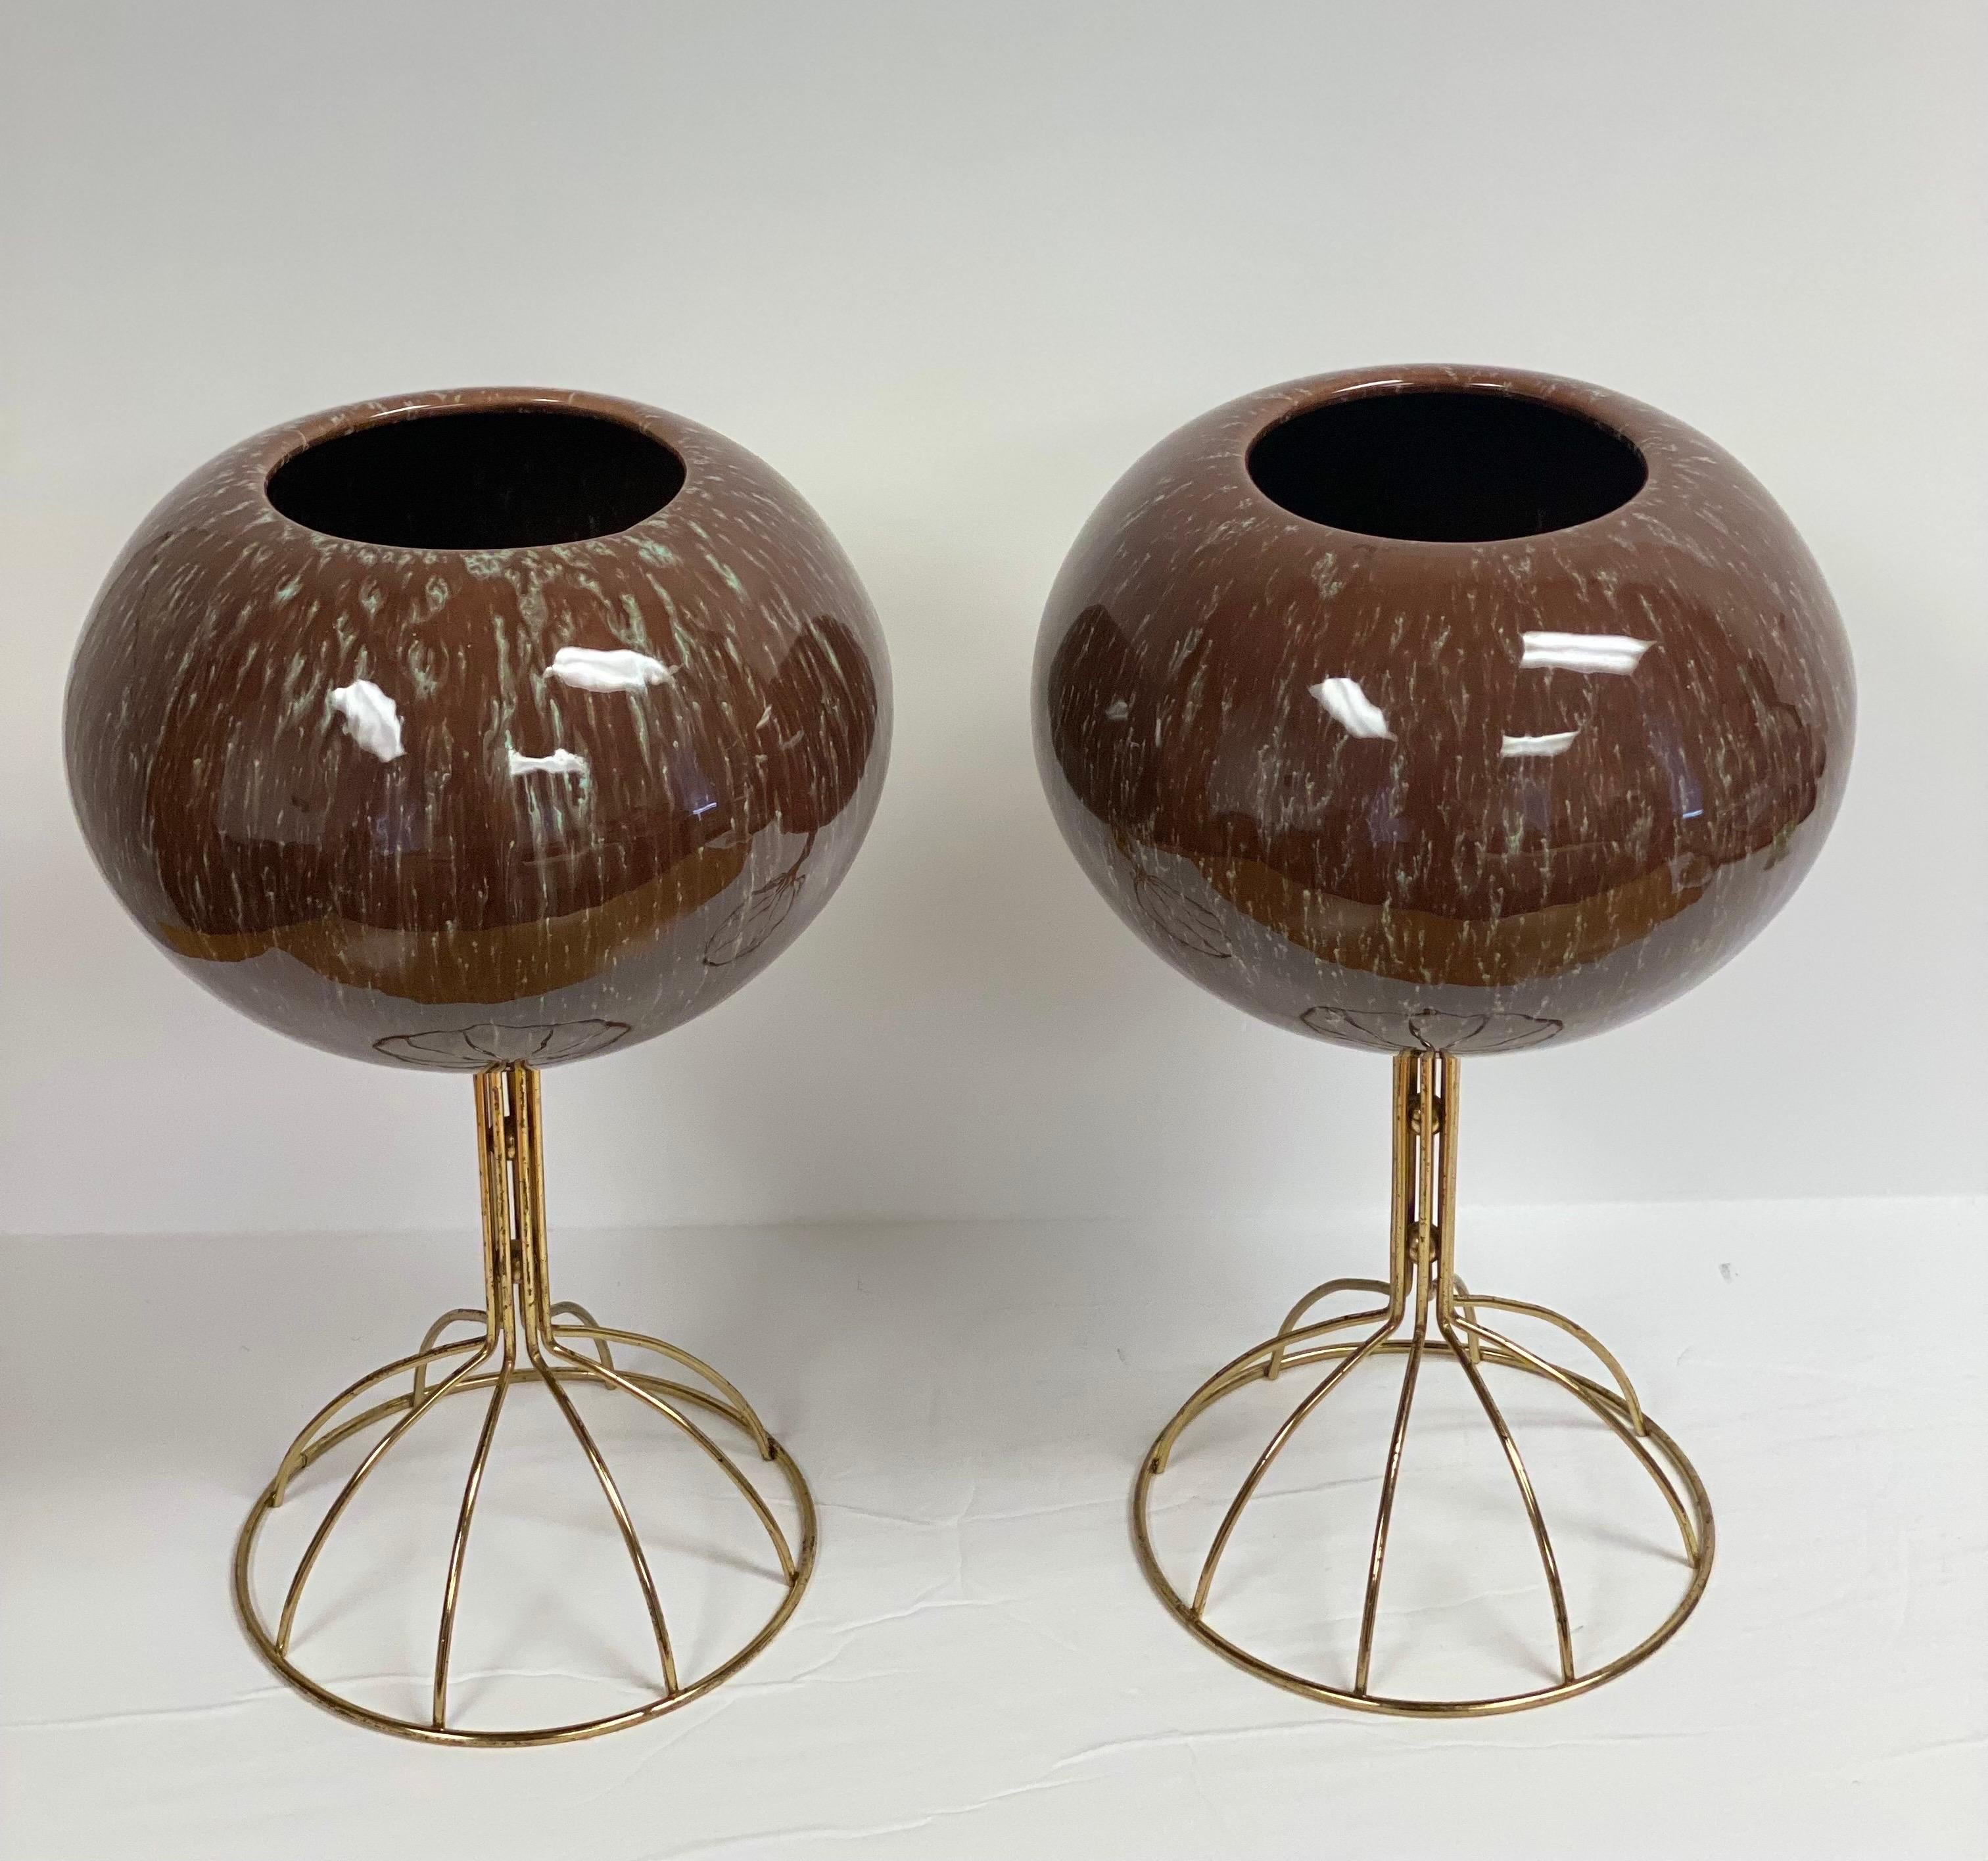 Vintage Italian Brown Ceramic Sphere Planters with Brass Stands, a Pair In Good Condition For Sale In Farmington Hills, MI